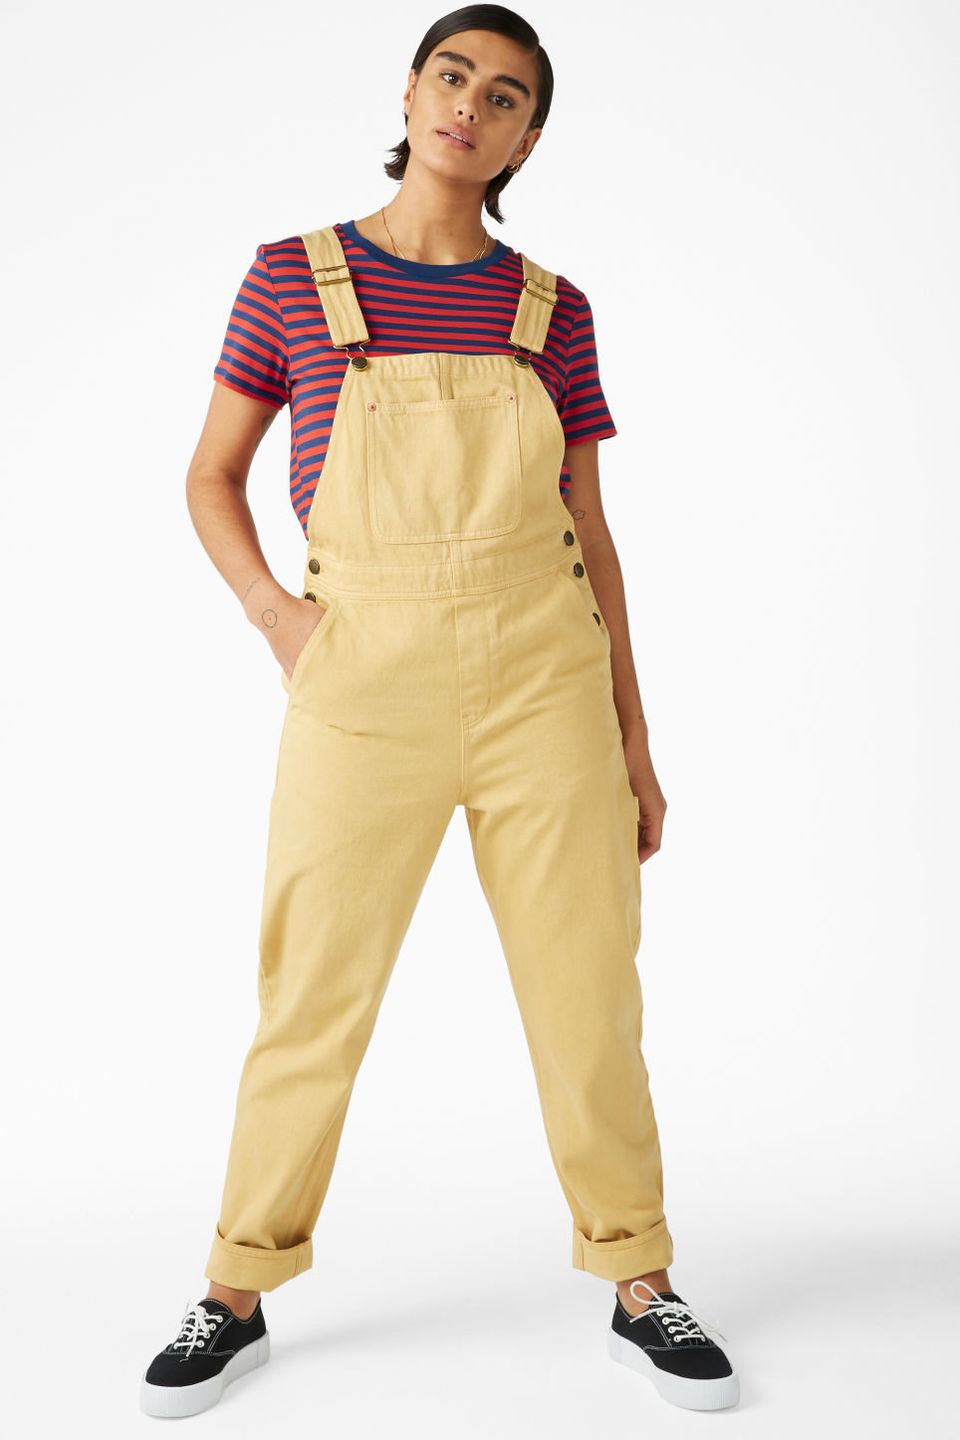 Don't Dodge The Dungaree